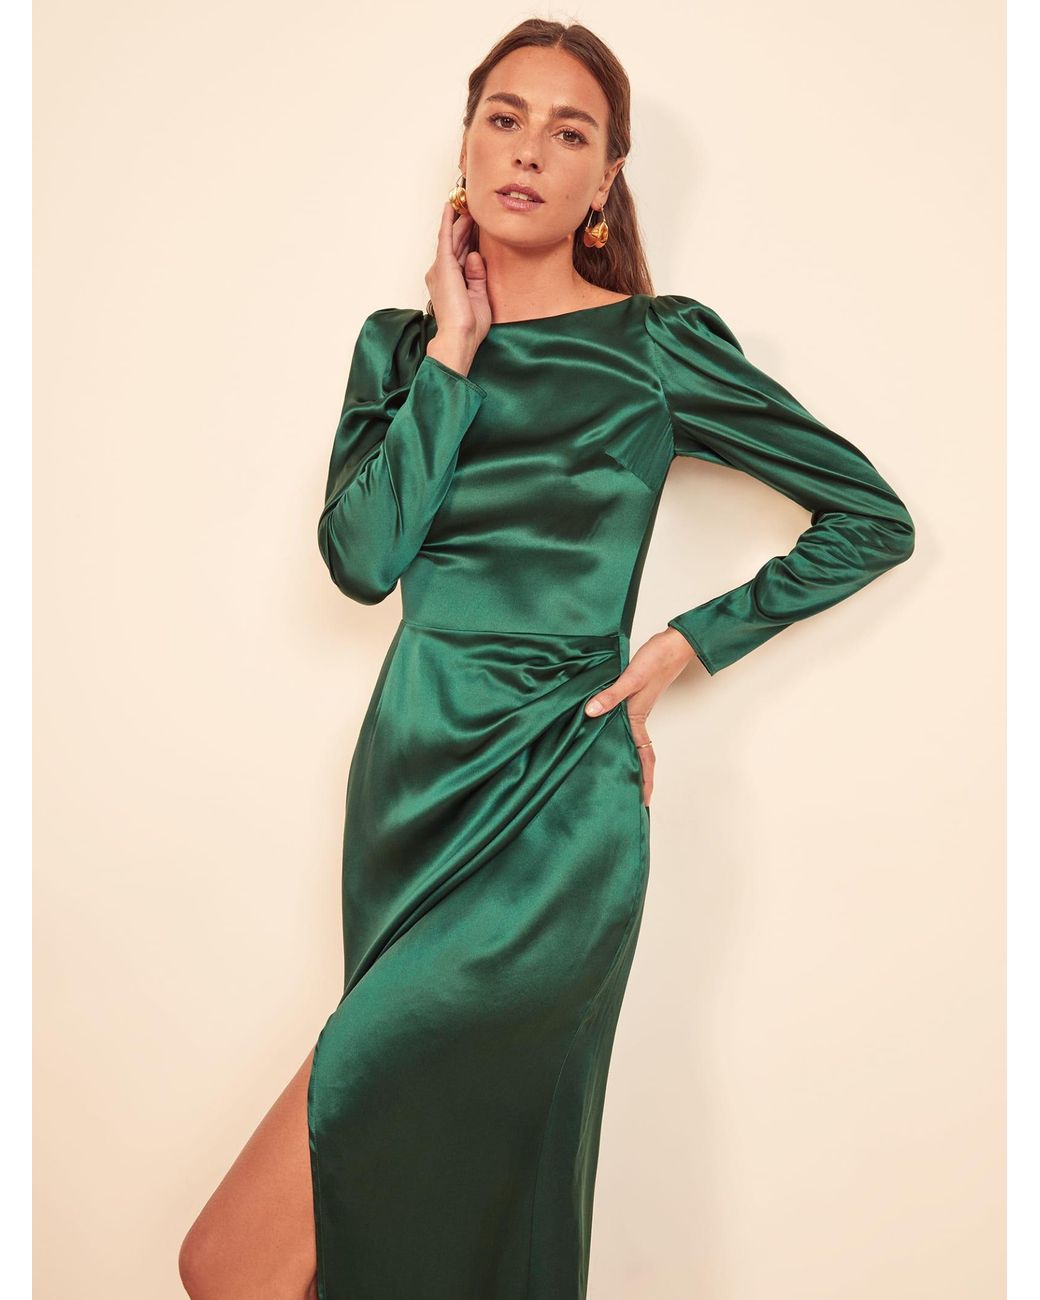 Reformation Cameron Dress in Green